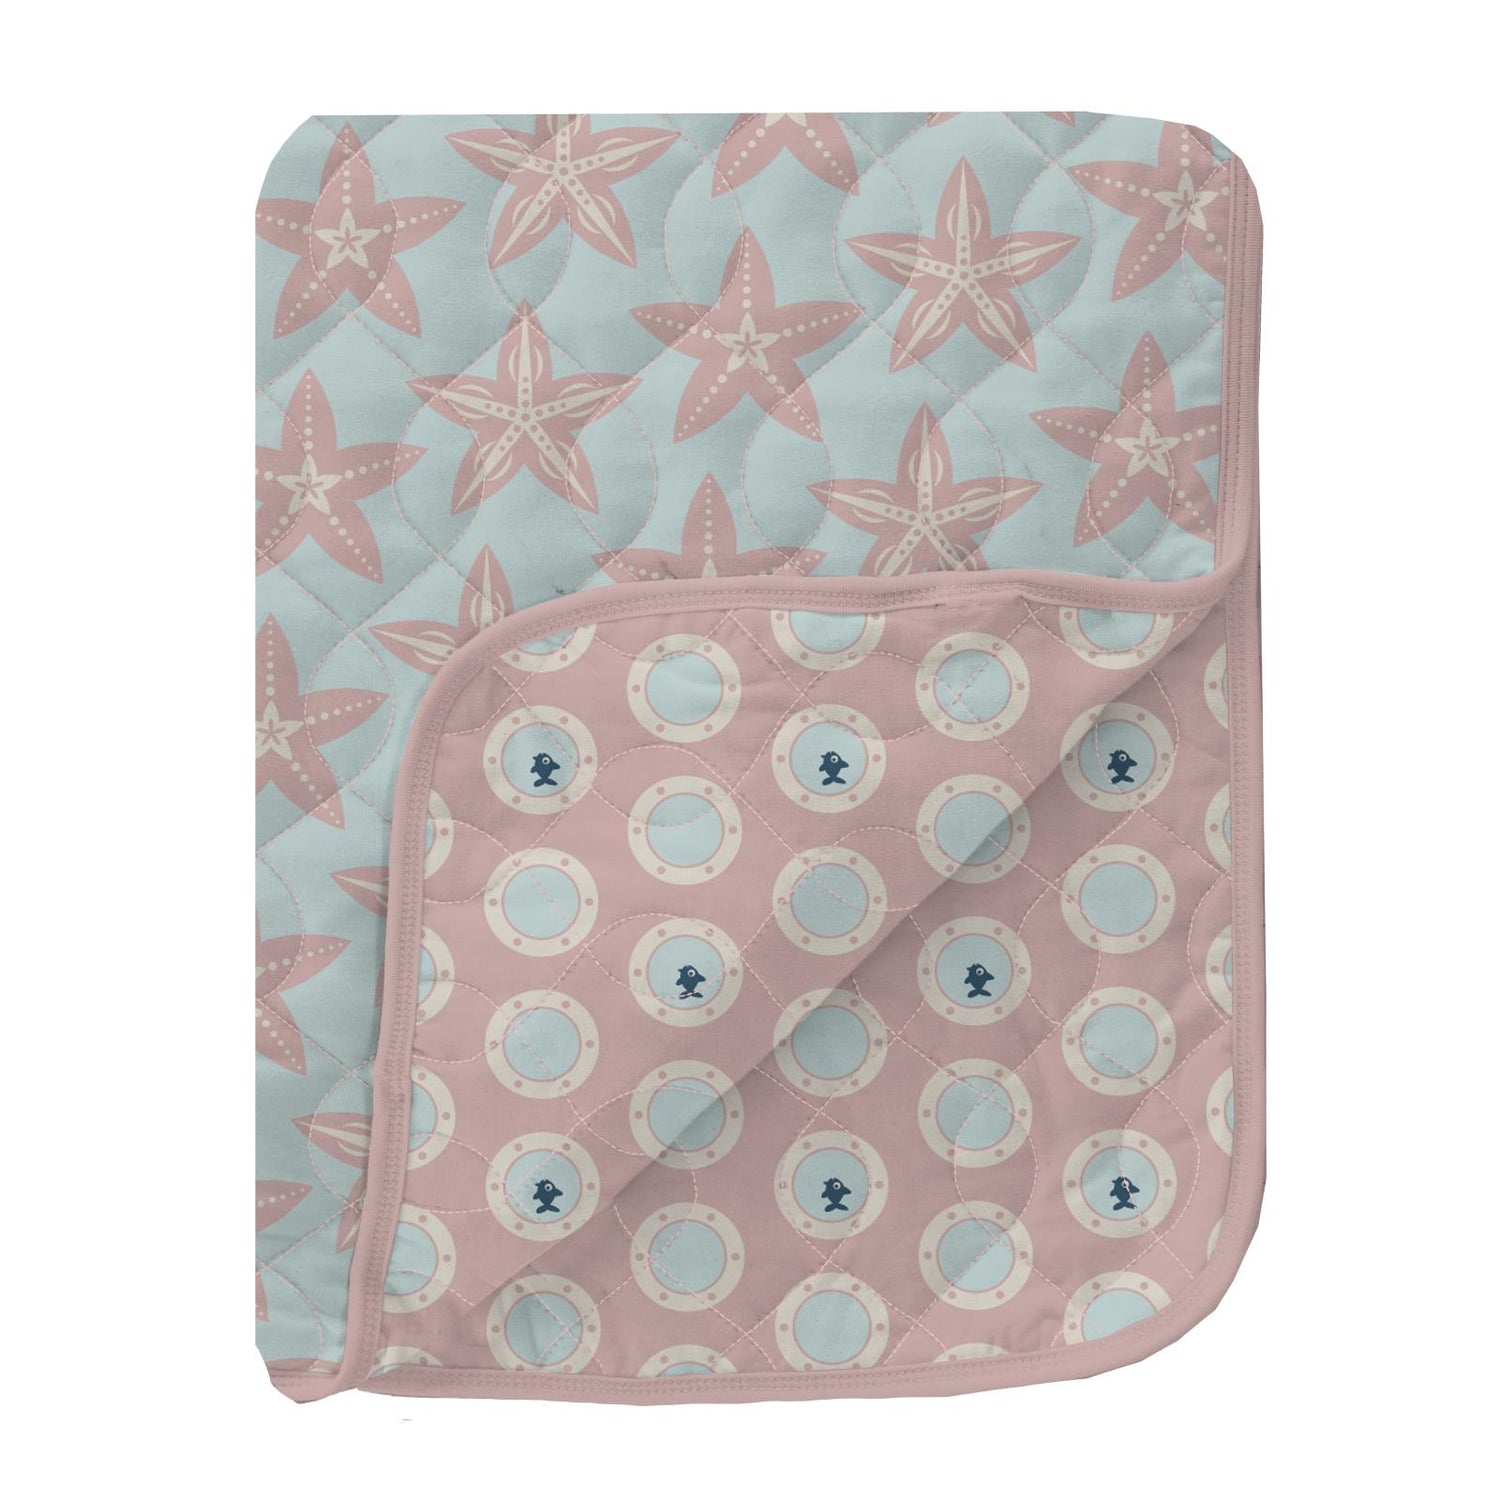 Print Quilted Stroller Blanket in Fresh Air Fancy Starfish/Baby Rose Porthole